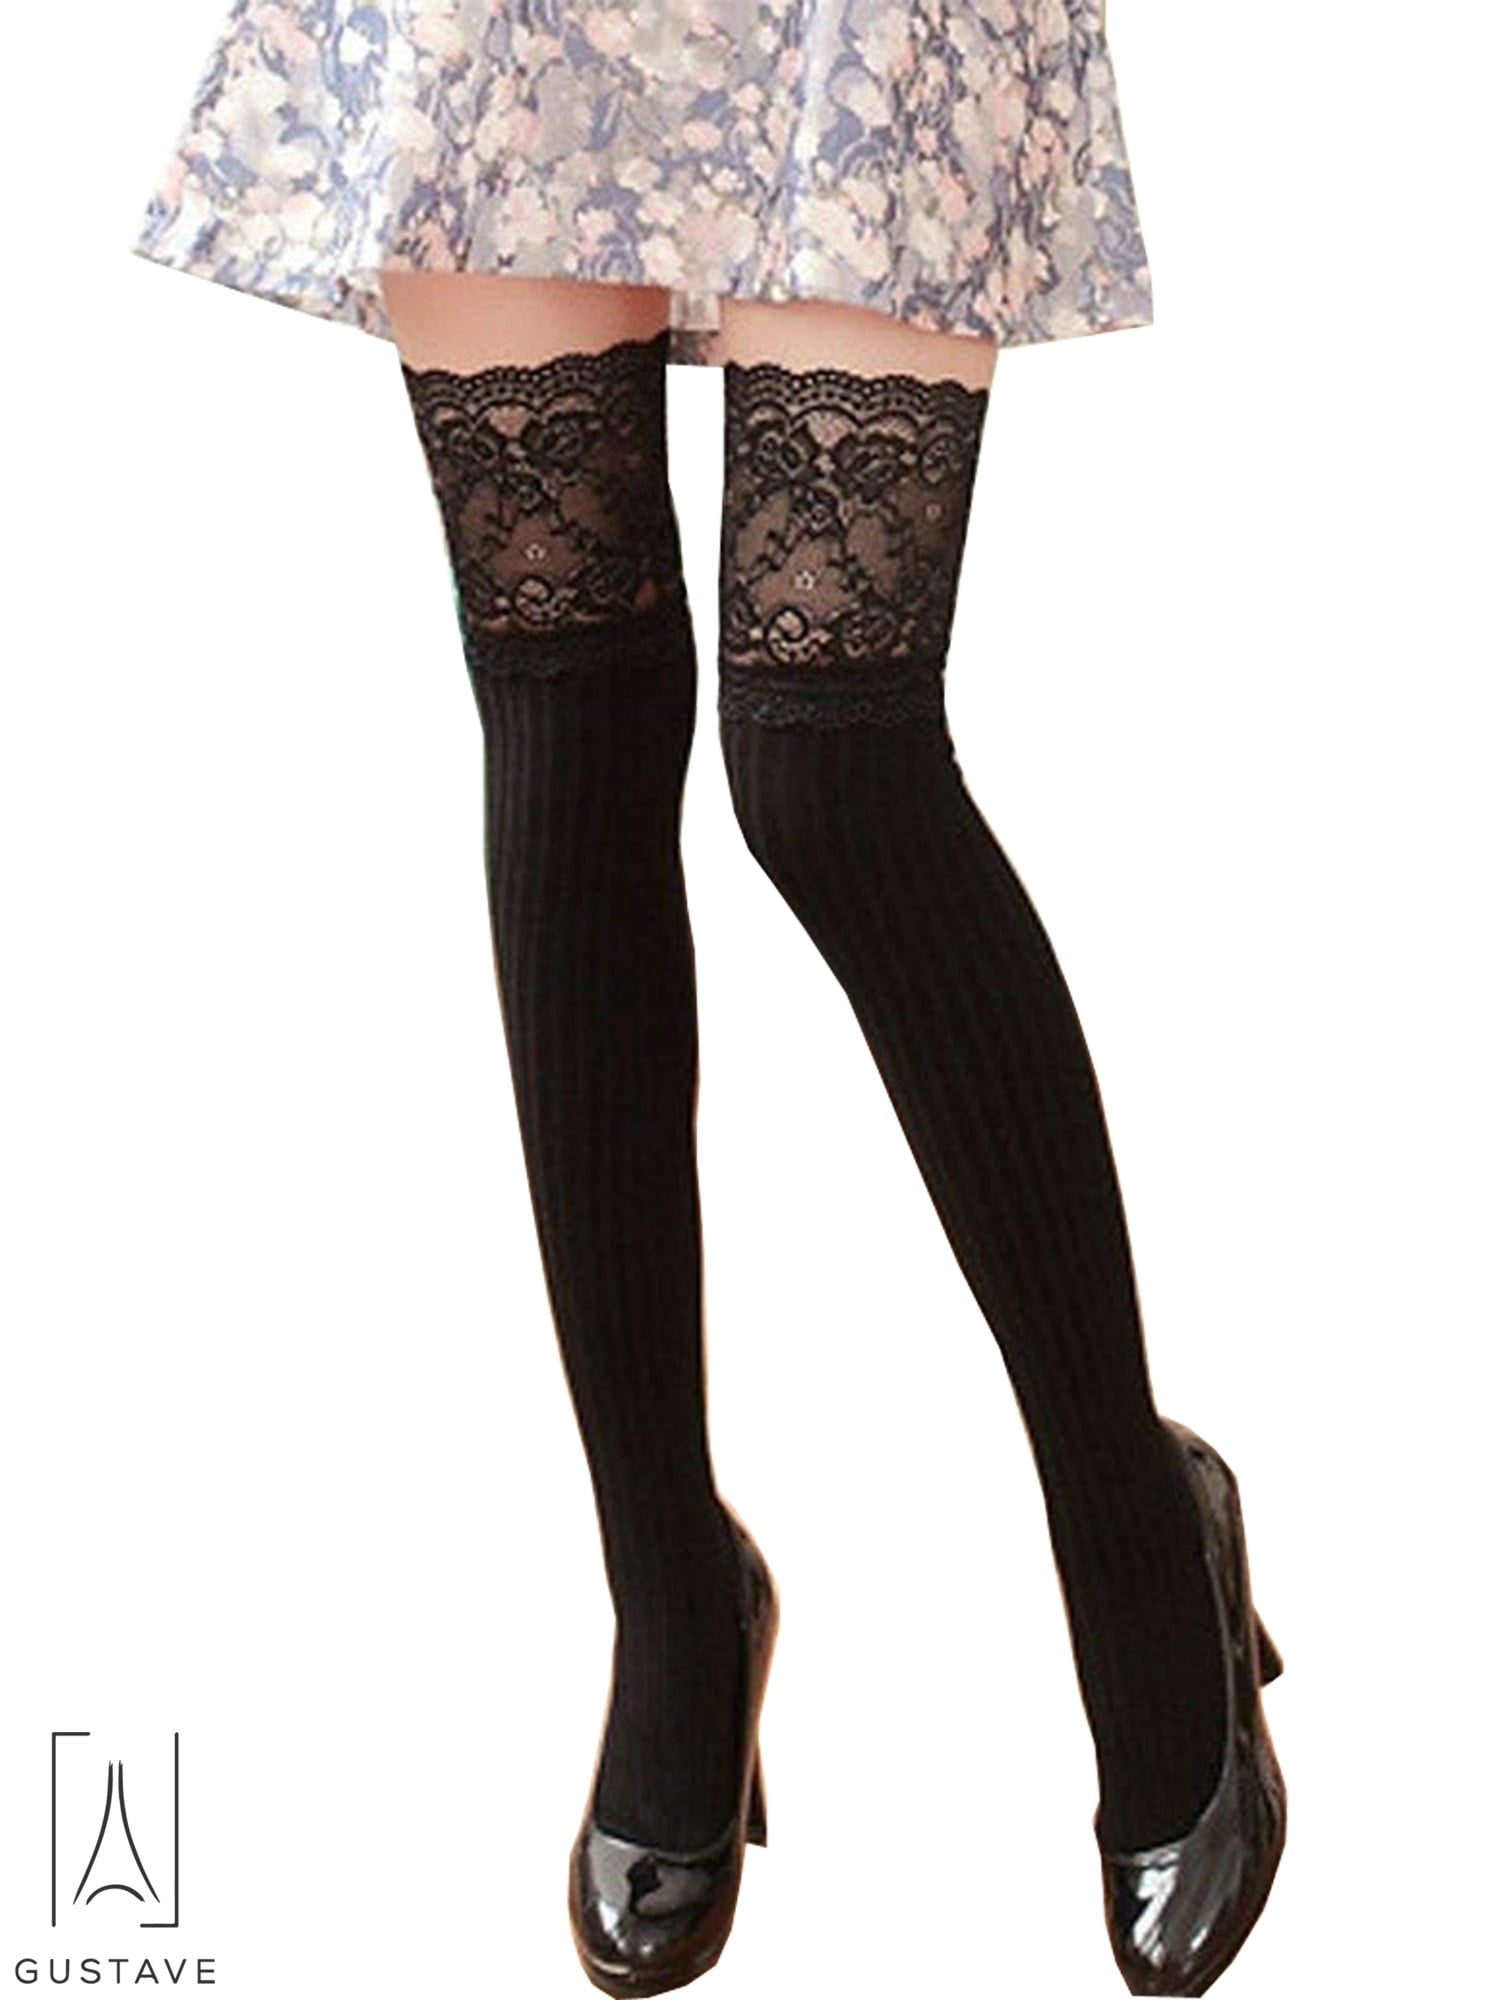 One Size Girls Womens Chicago Retro 1970s Style Over Knee Thigh High Stockings Cute Socks 